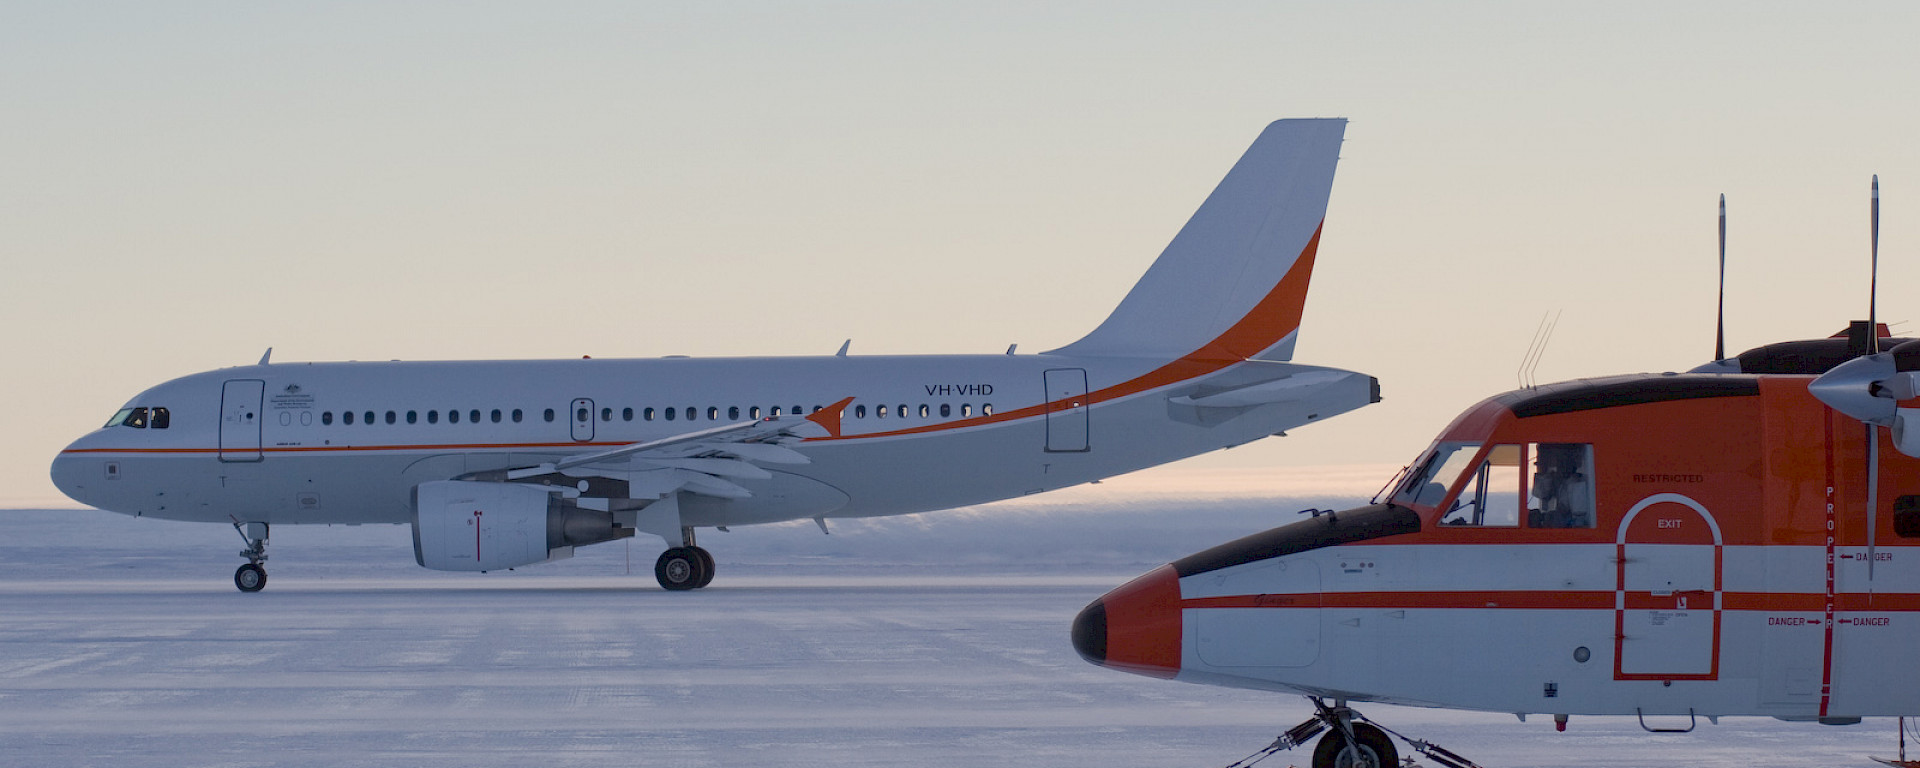 Airbus A319-400 and CASA 212–400 aircraft on the Wilkins Ice Runway in Antarctica